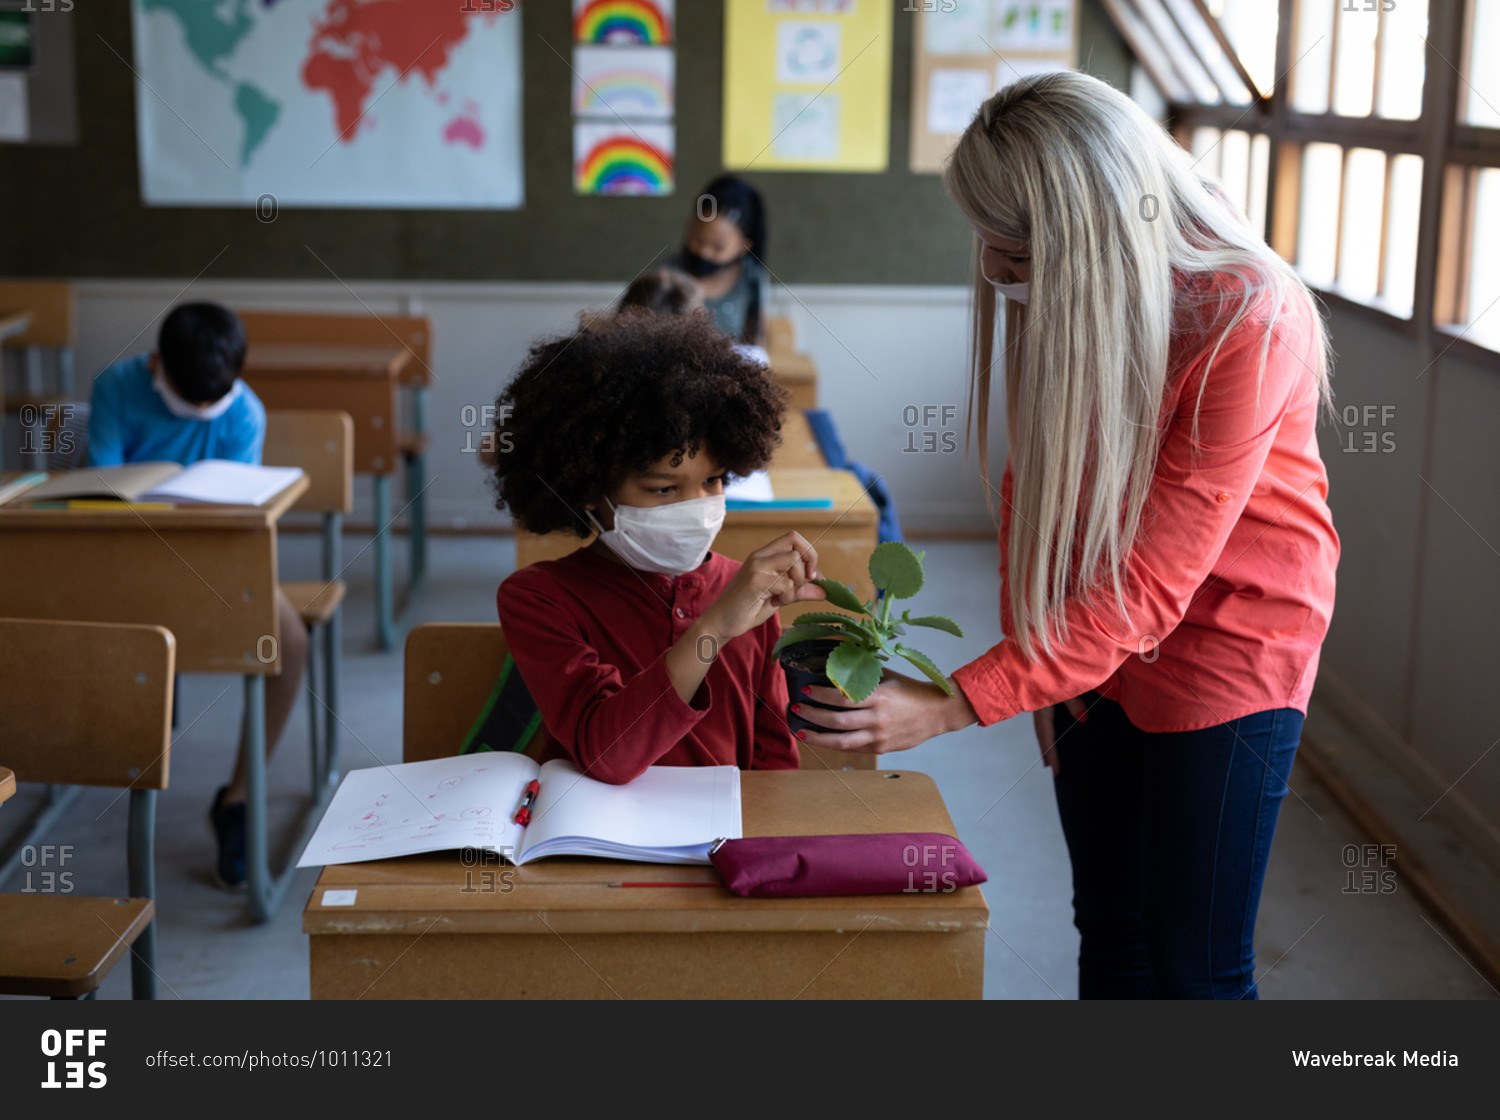 Female Caucasian teacher wearing face mask showing a plant pot to a mixed race boy in school. Primary education social distancing health safety during Covid19 Coronavirus pandemic.